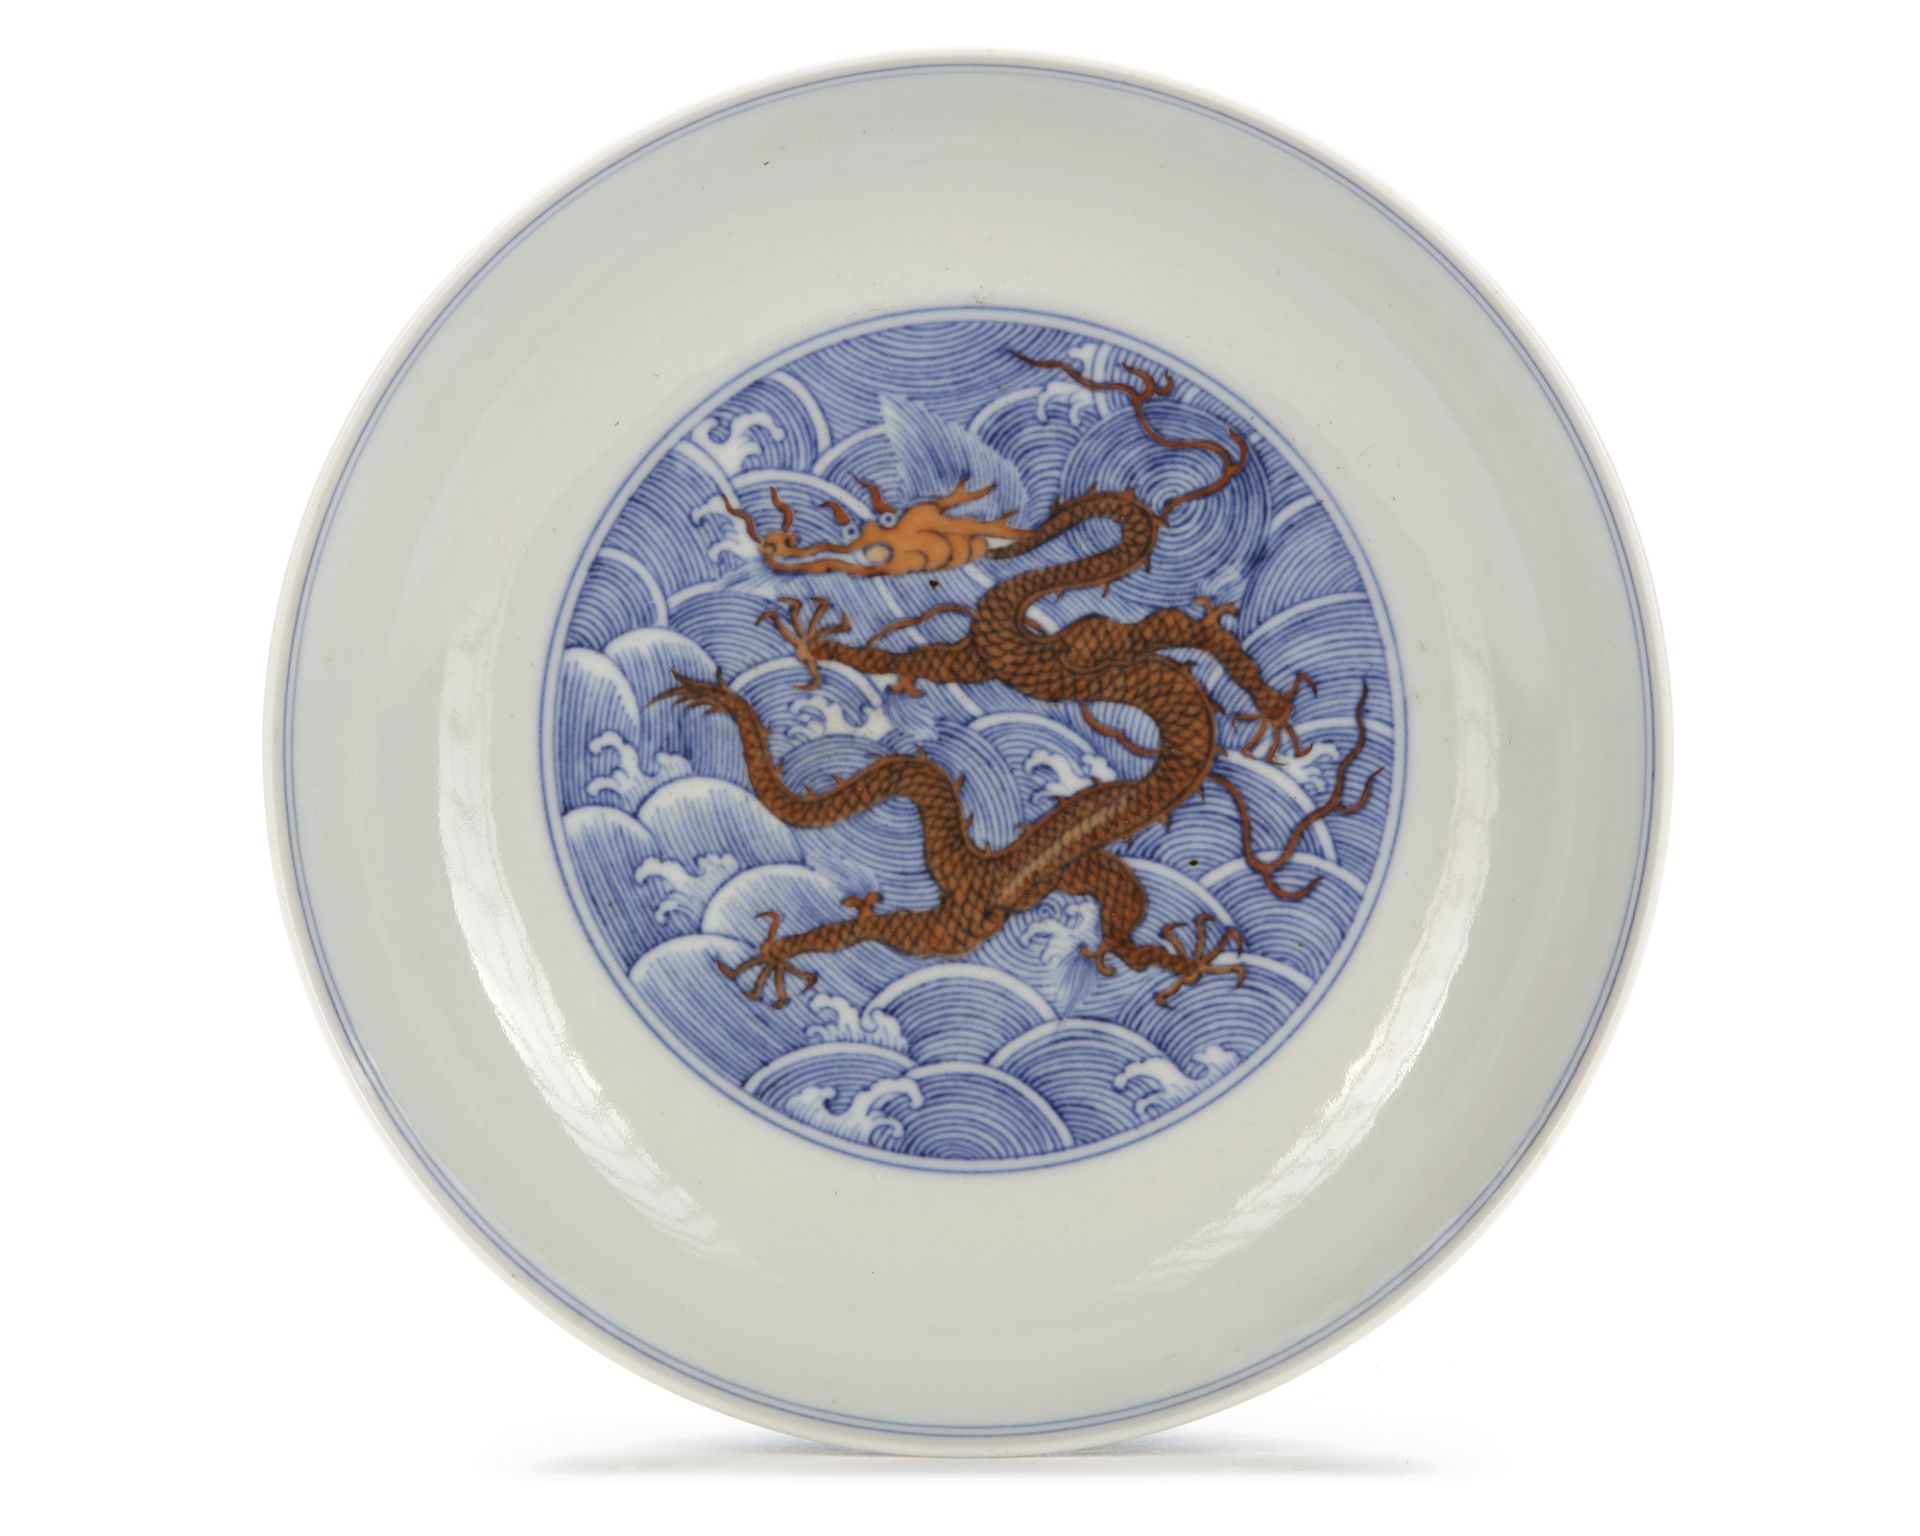 A CHINESE IRON-RED-DECORATED BLUE AND WHITE DRAGON DISH, 19TH CENTURY